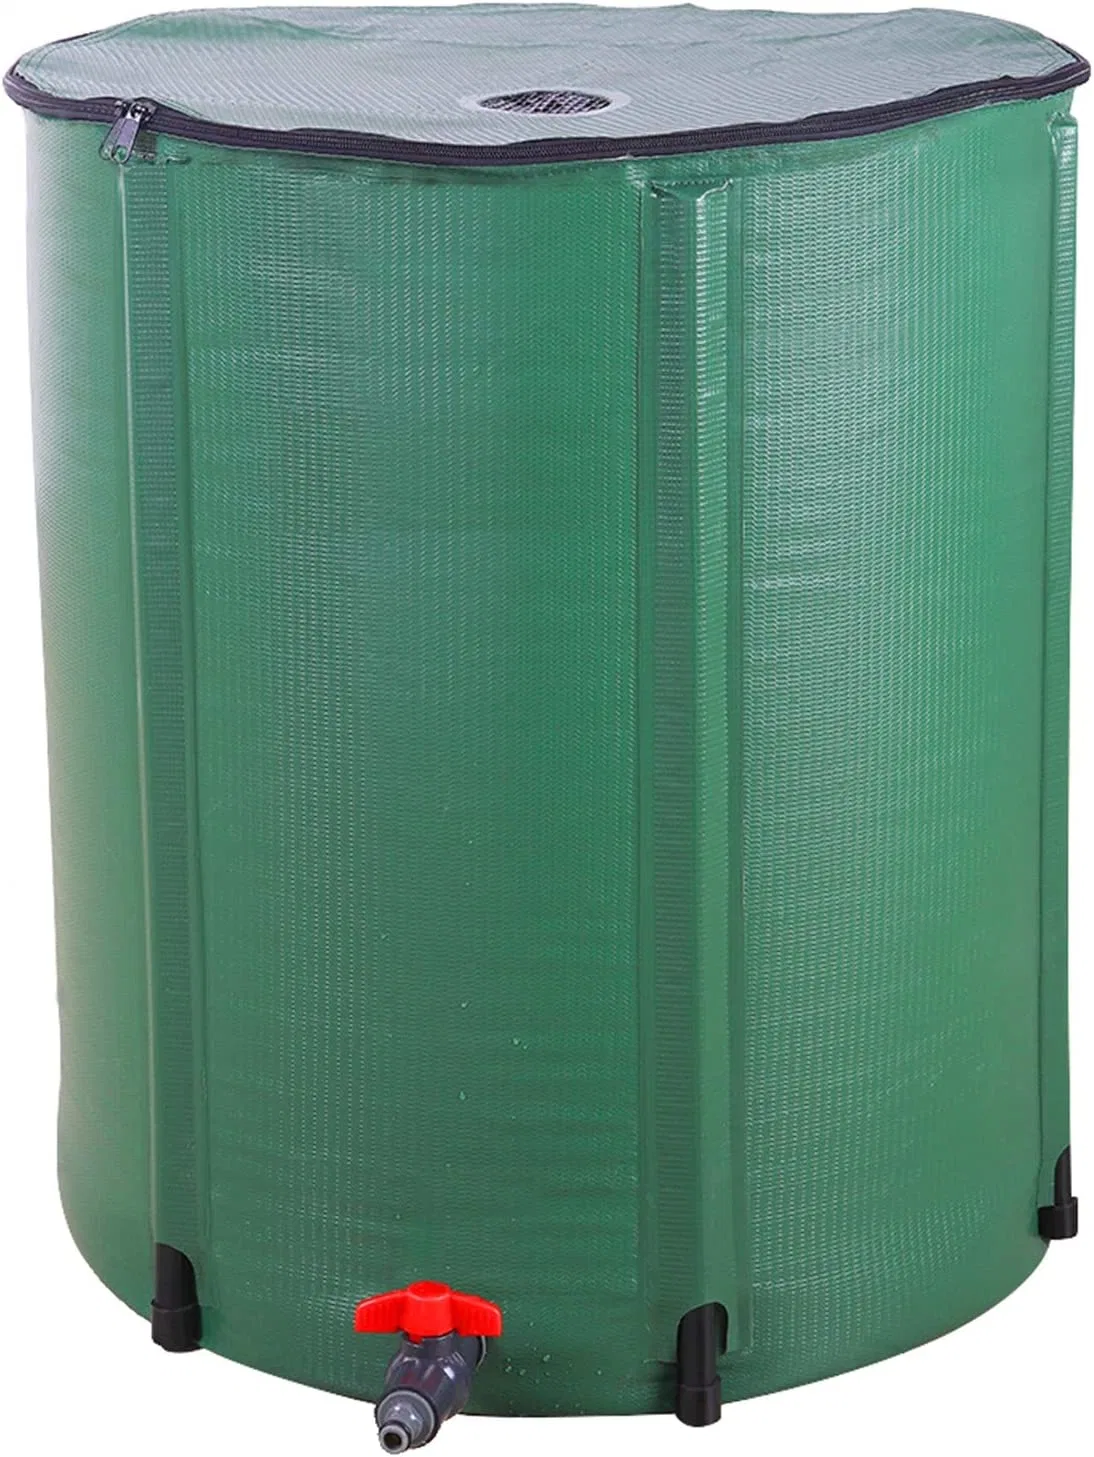 Collapsible Rain Barrels with Water Innet Filter Foldable Raintrap Diverter Sturdy PVC Garden Hydroponics Rain Water Collection Storage Tank